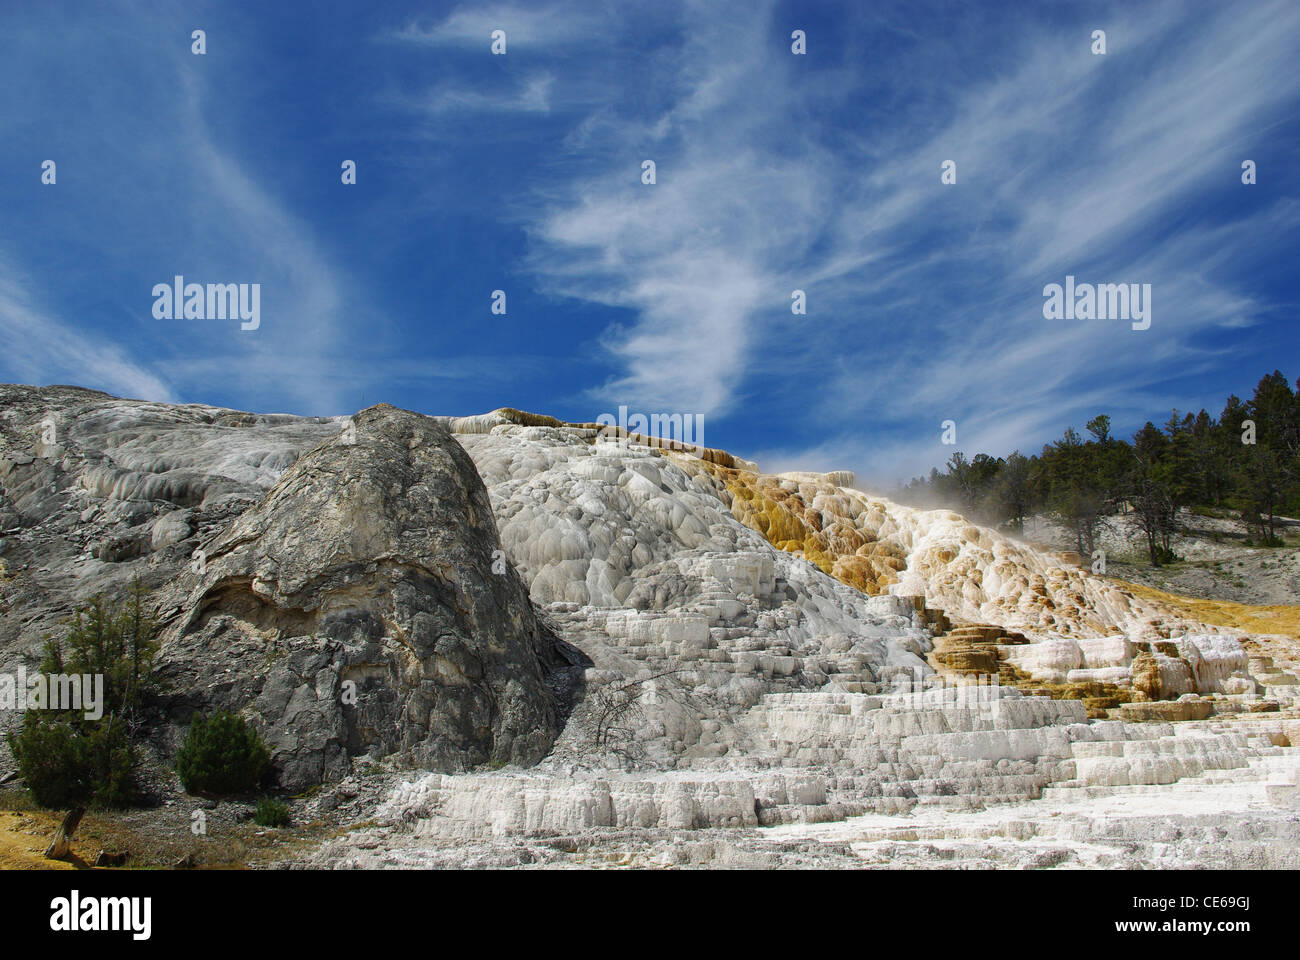 Terrasses de mammouth Impression, le Parc National de Yellowstone, Wyoming Banque D'Images